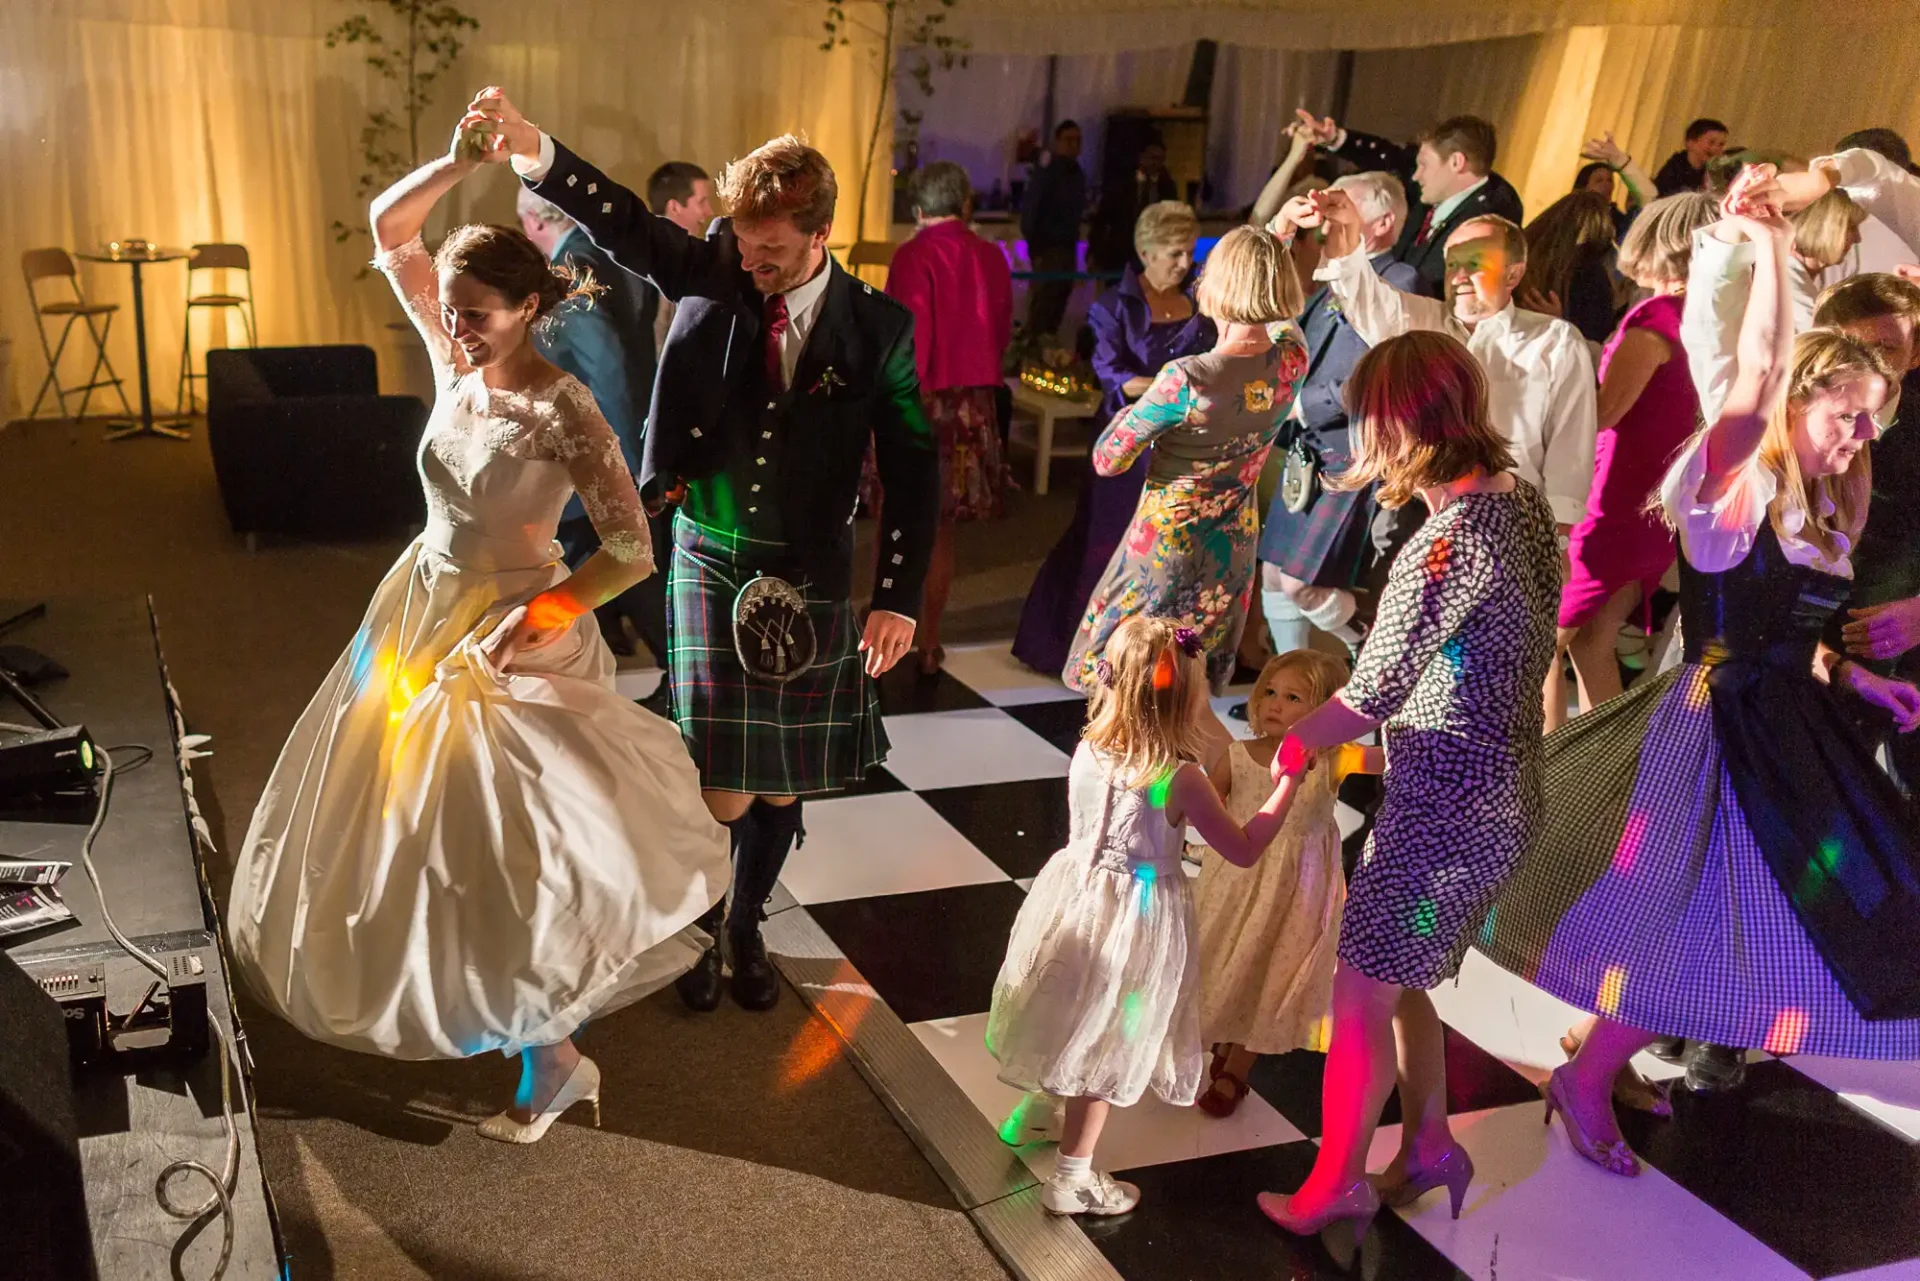 A bride and groom happily dancing with guests in a lively wedding reception hall, illuminated by warm lighting.